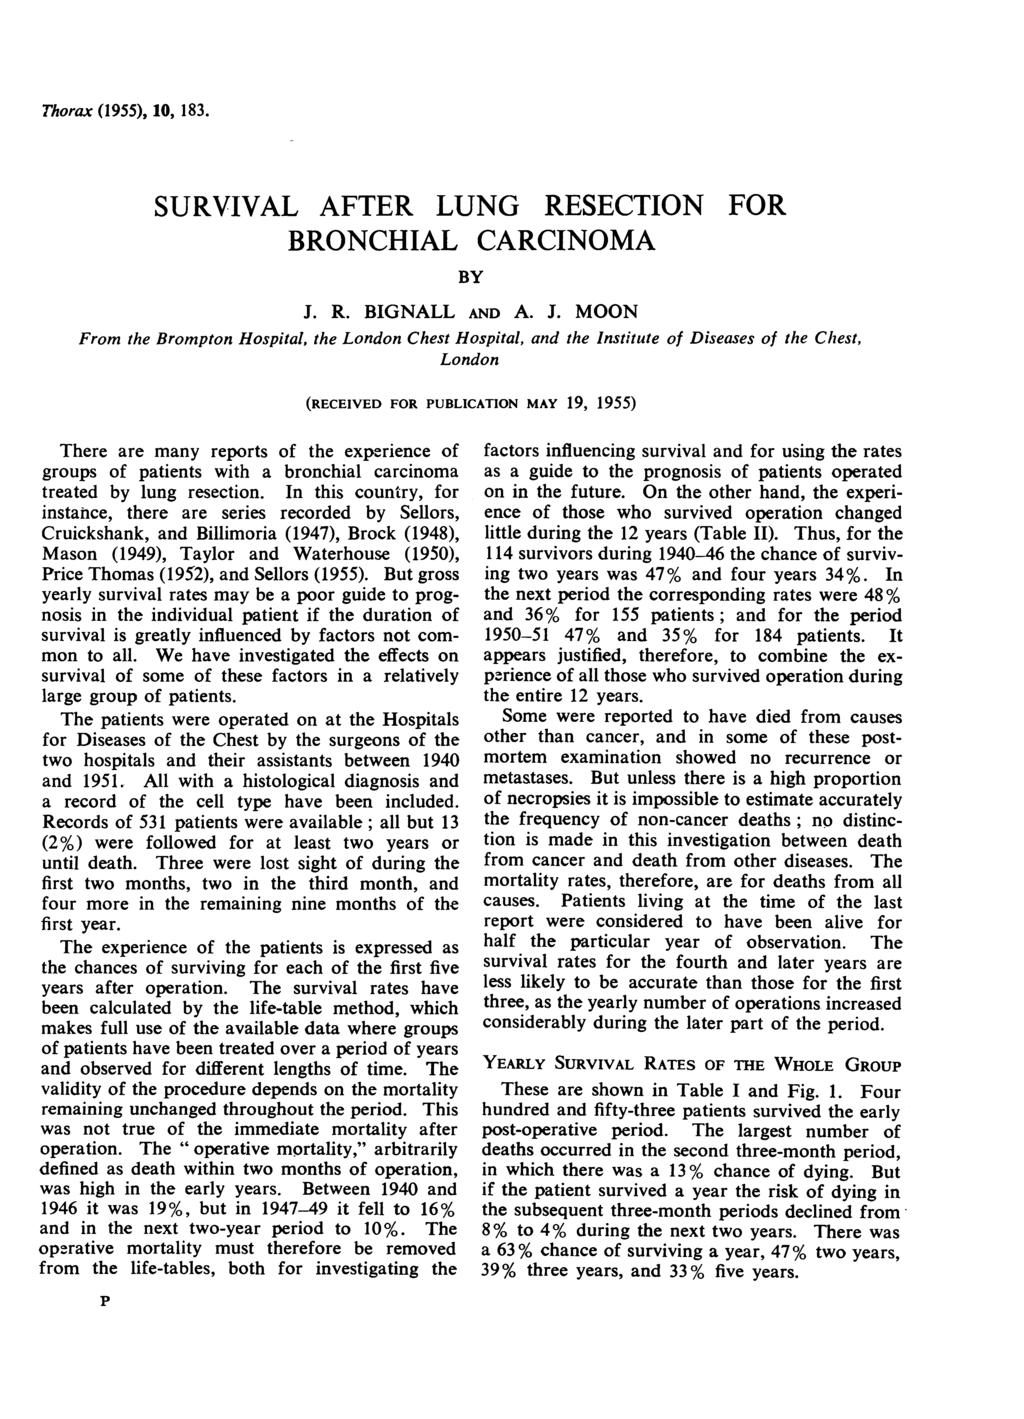 Thorax (1955), 10, 183. SURVIVAL AFTER LUNG RESECTION FOR BRONCHIAL CARCINOMA BY J.